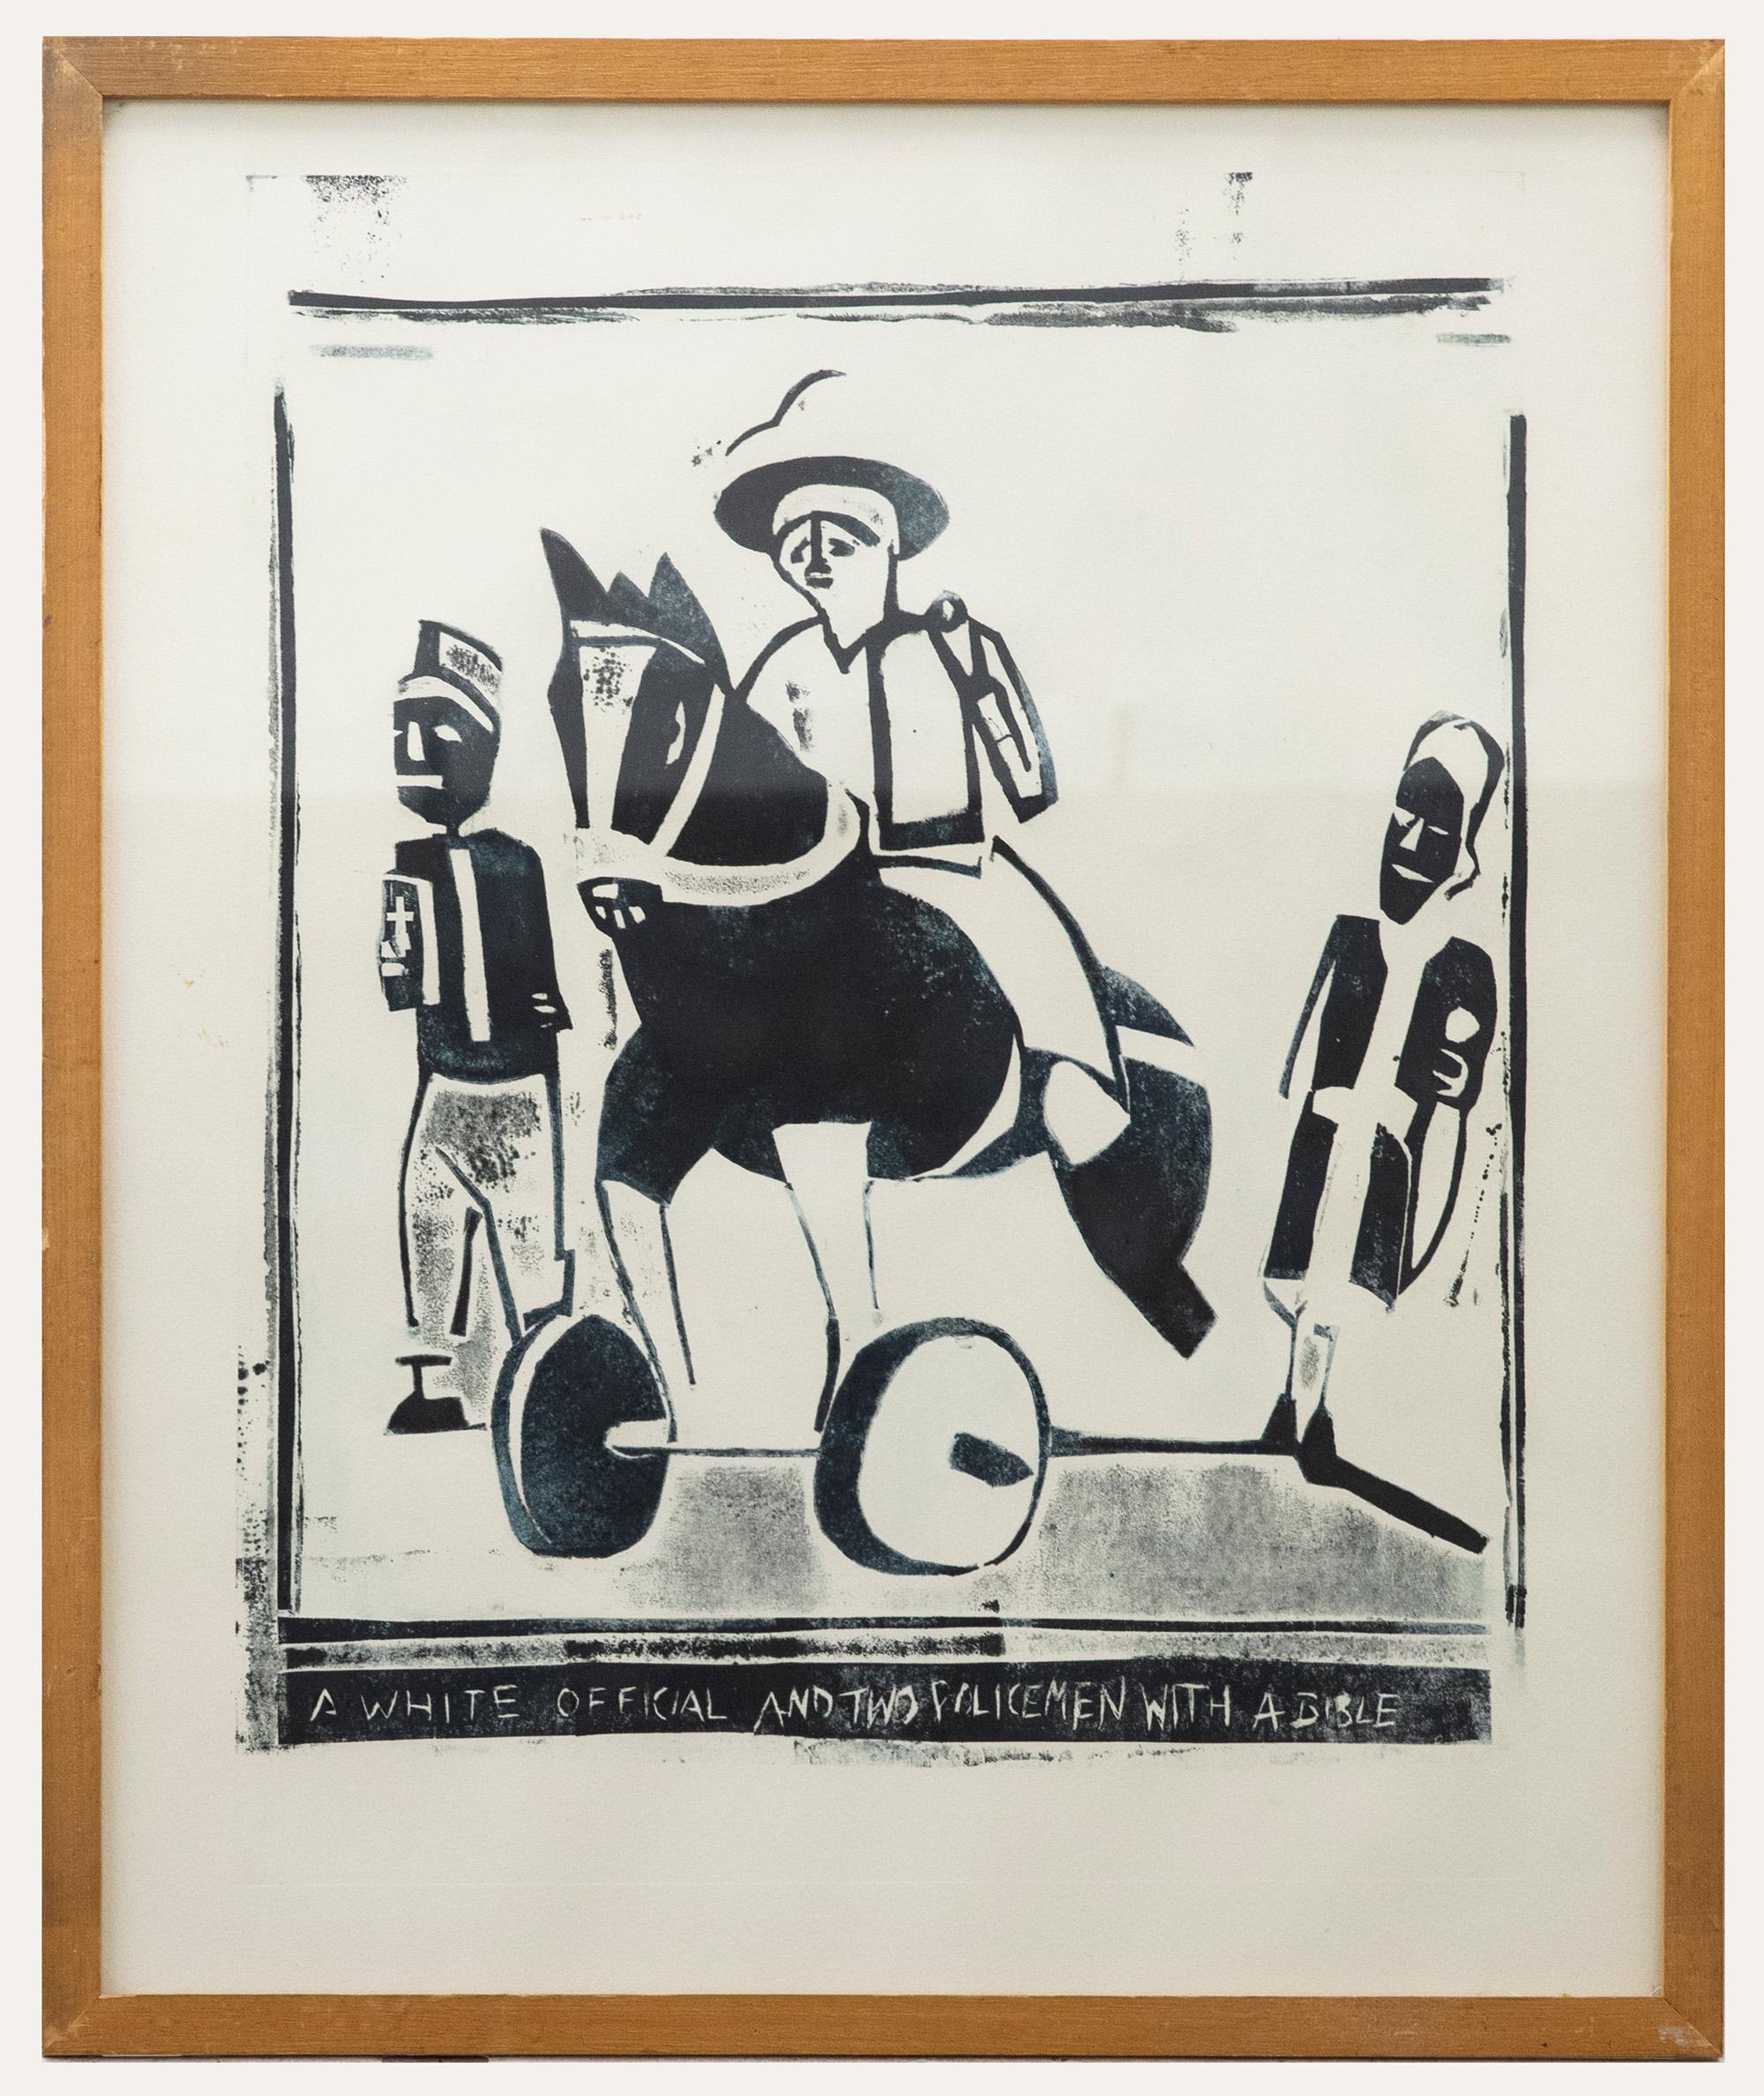 Unknown Figurative Print - 20th Century Linoprint - A White Official with Two Policemen and a Bible